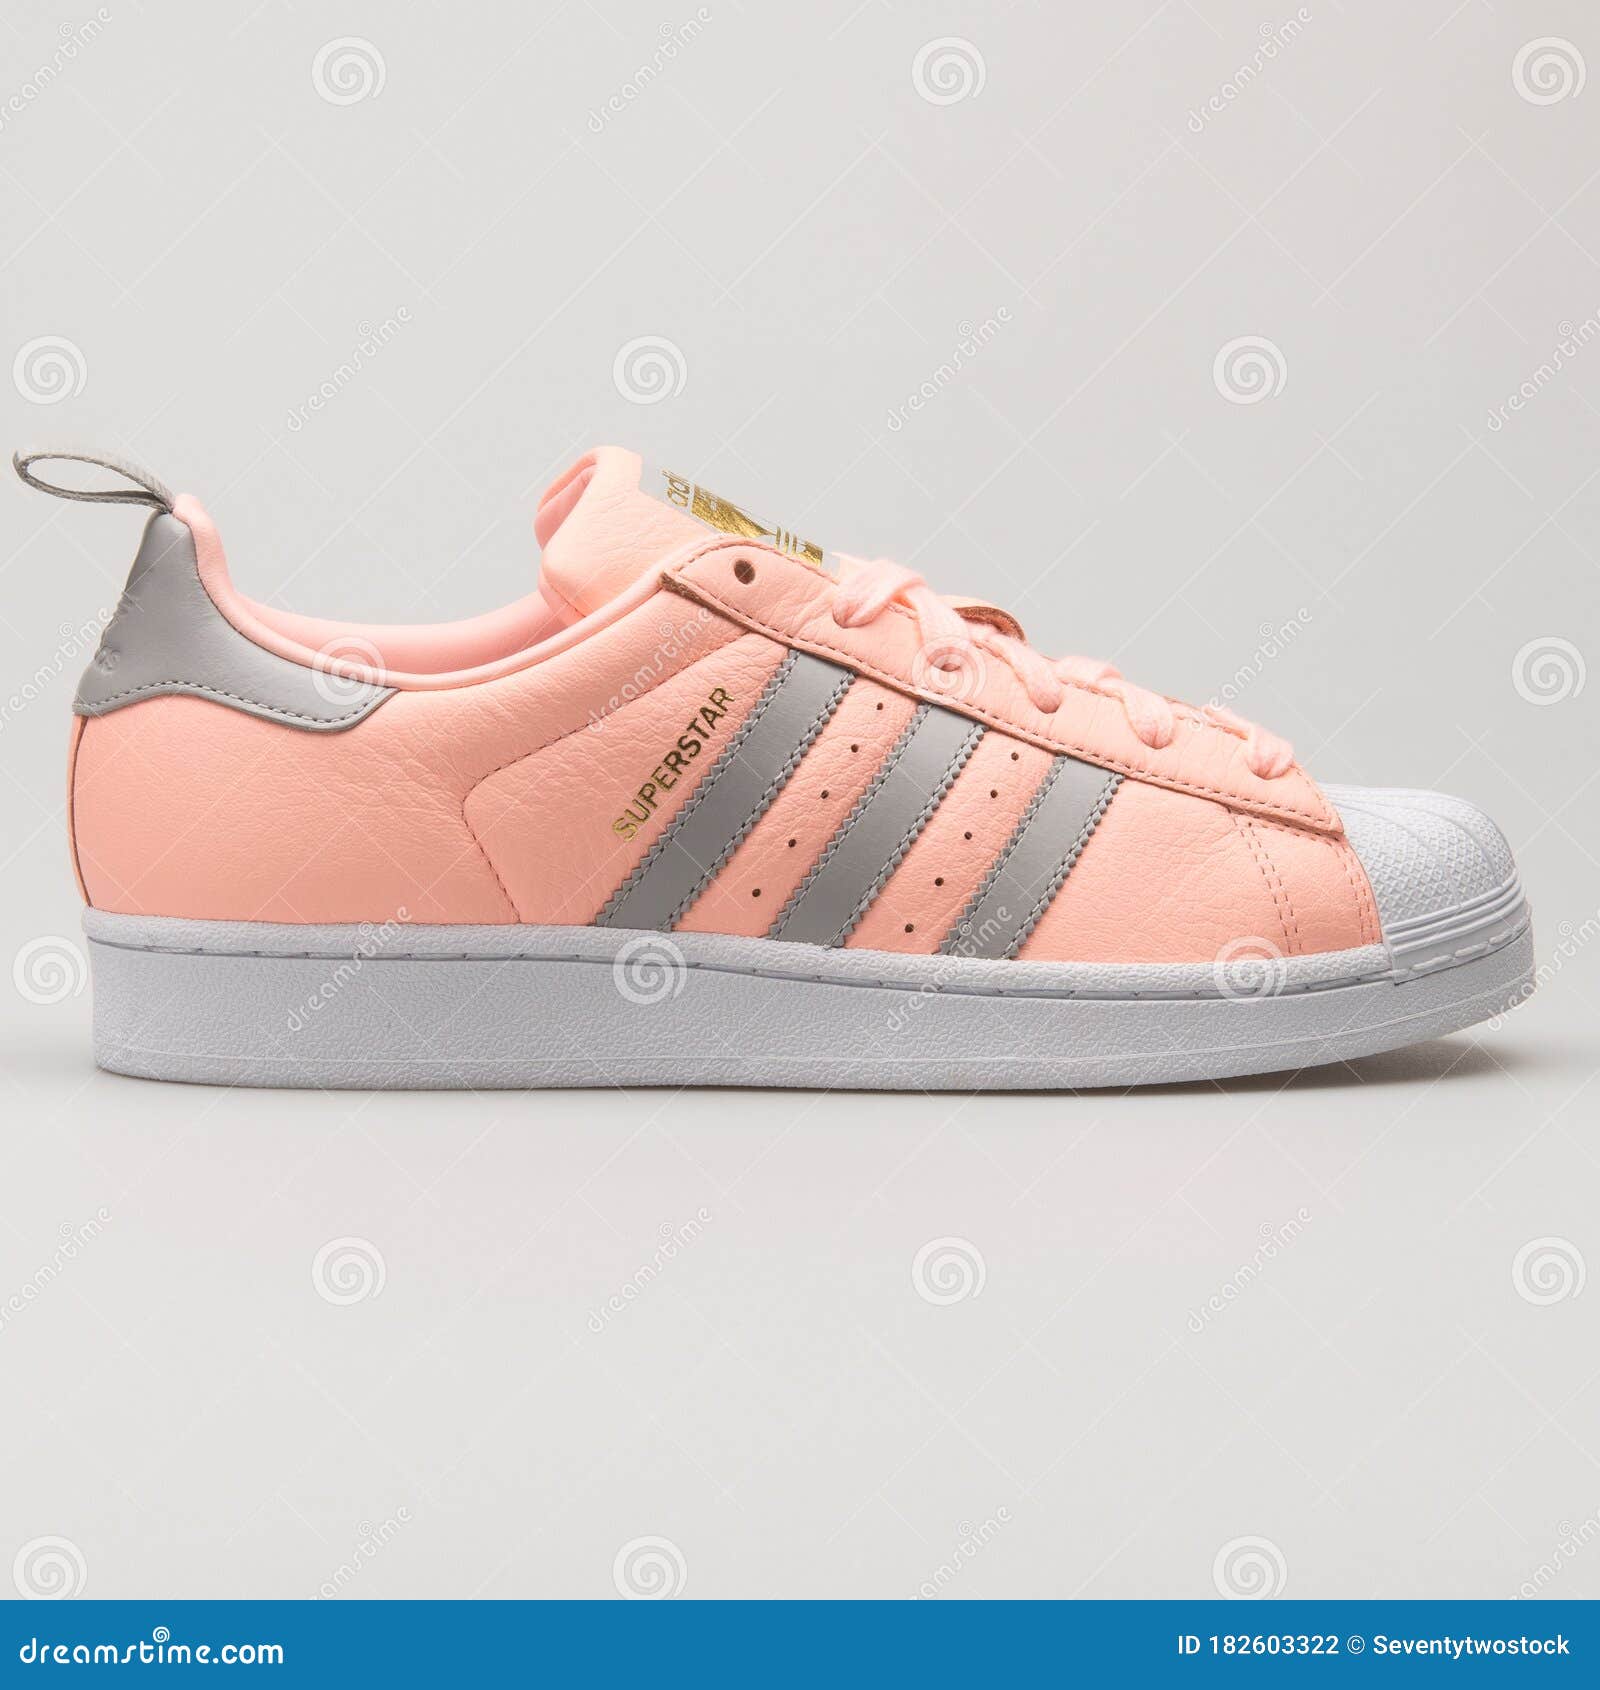 Adidas Superstar Rose, Gold, Grey and White Sneaker Editorial Photography -  Image of background, equipment: 182603322